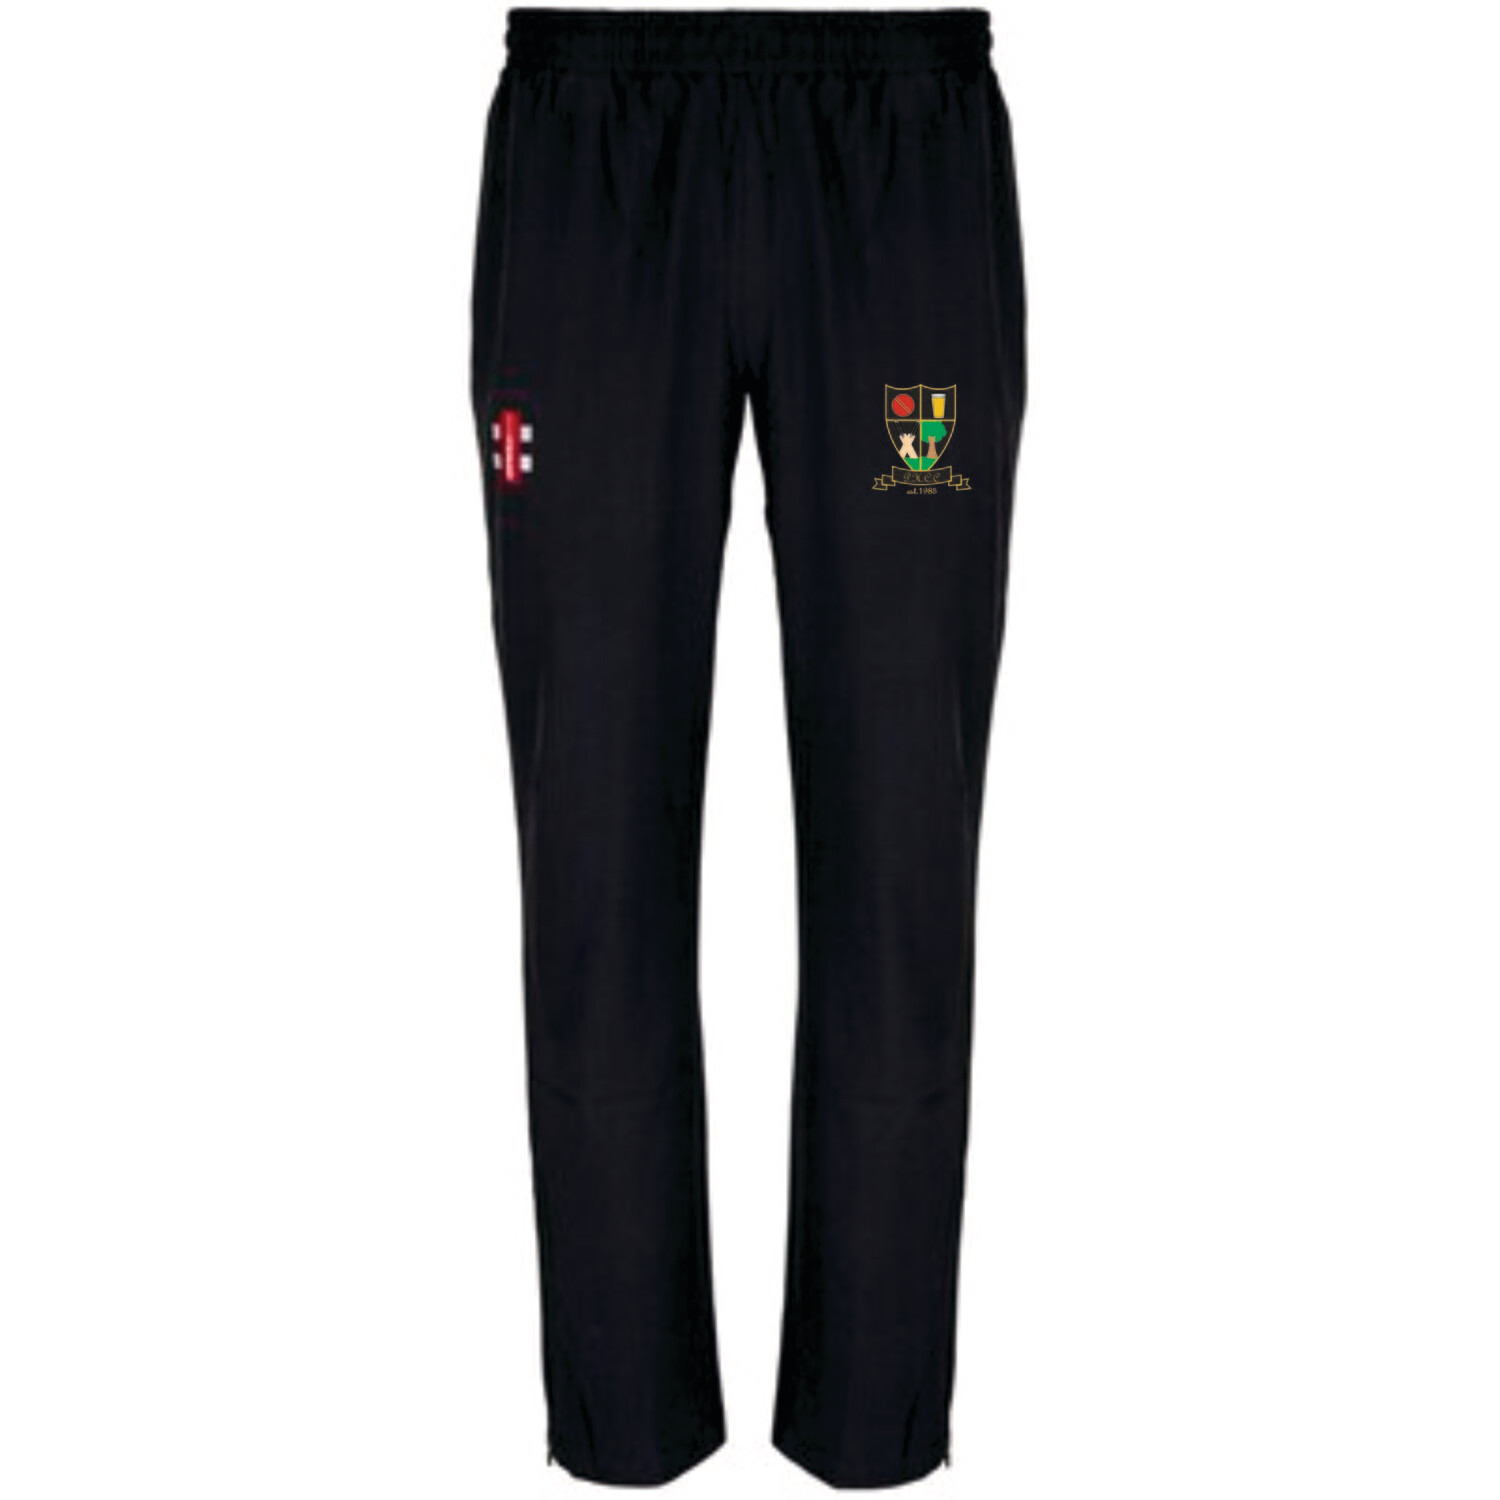 Parkhouse Velocity Training Trousers